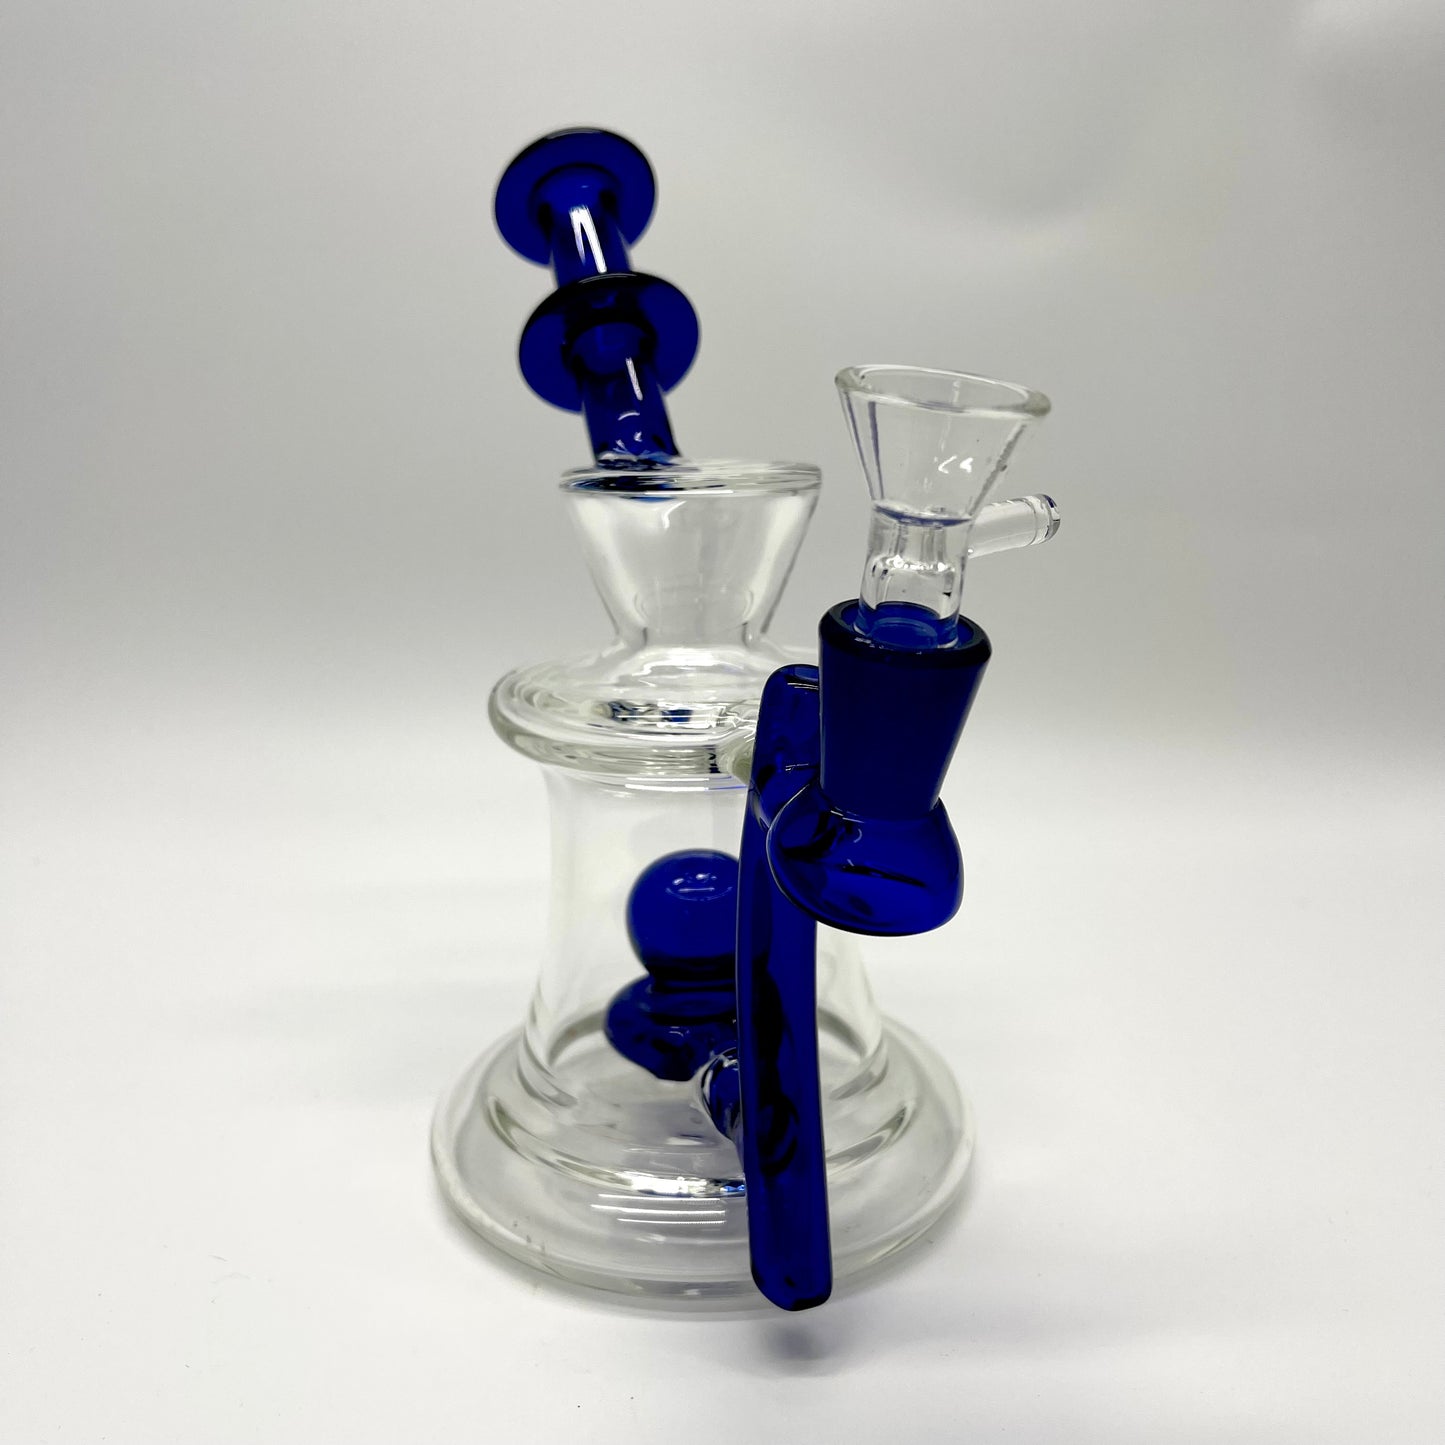 Weedo Small Glass Bongs 19cm Special Edition Only 1 In Stock